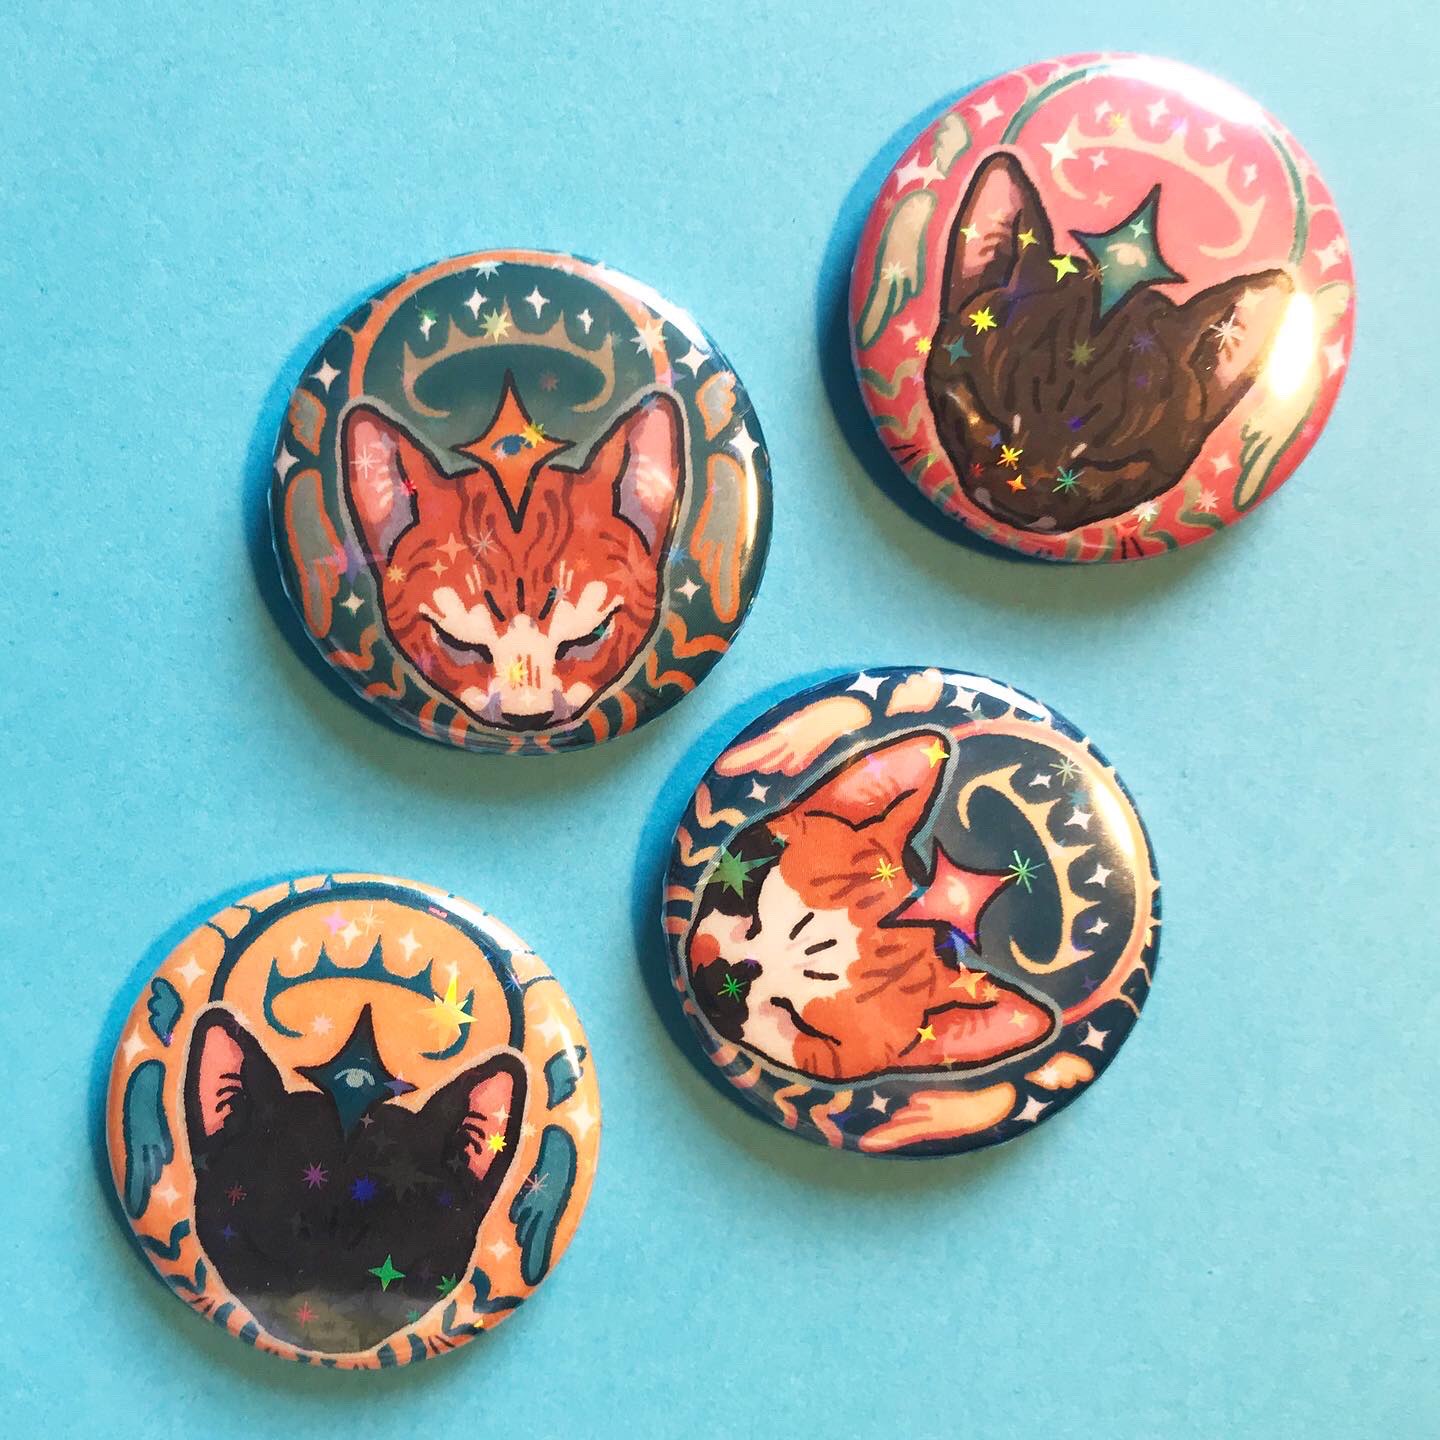 A photograph of four holographic badges against a blue background. There are four badges, each with a different variant of the same design, a cat surrounded by wings, crowns and rays of light.